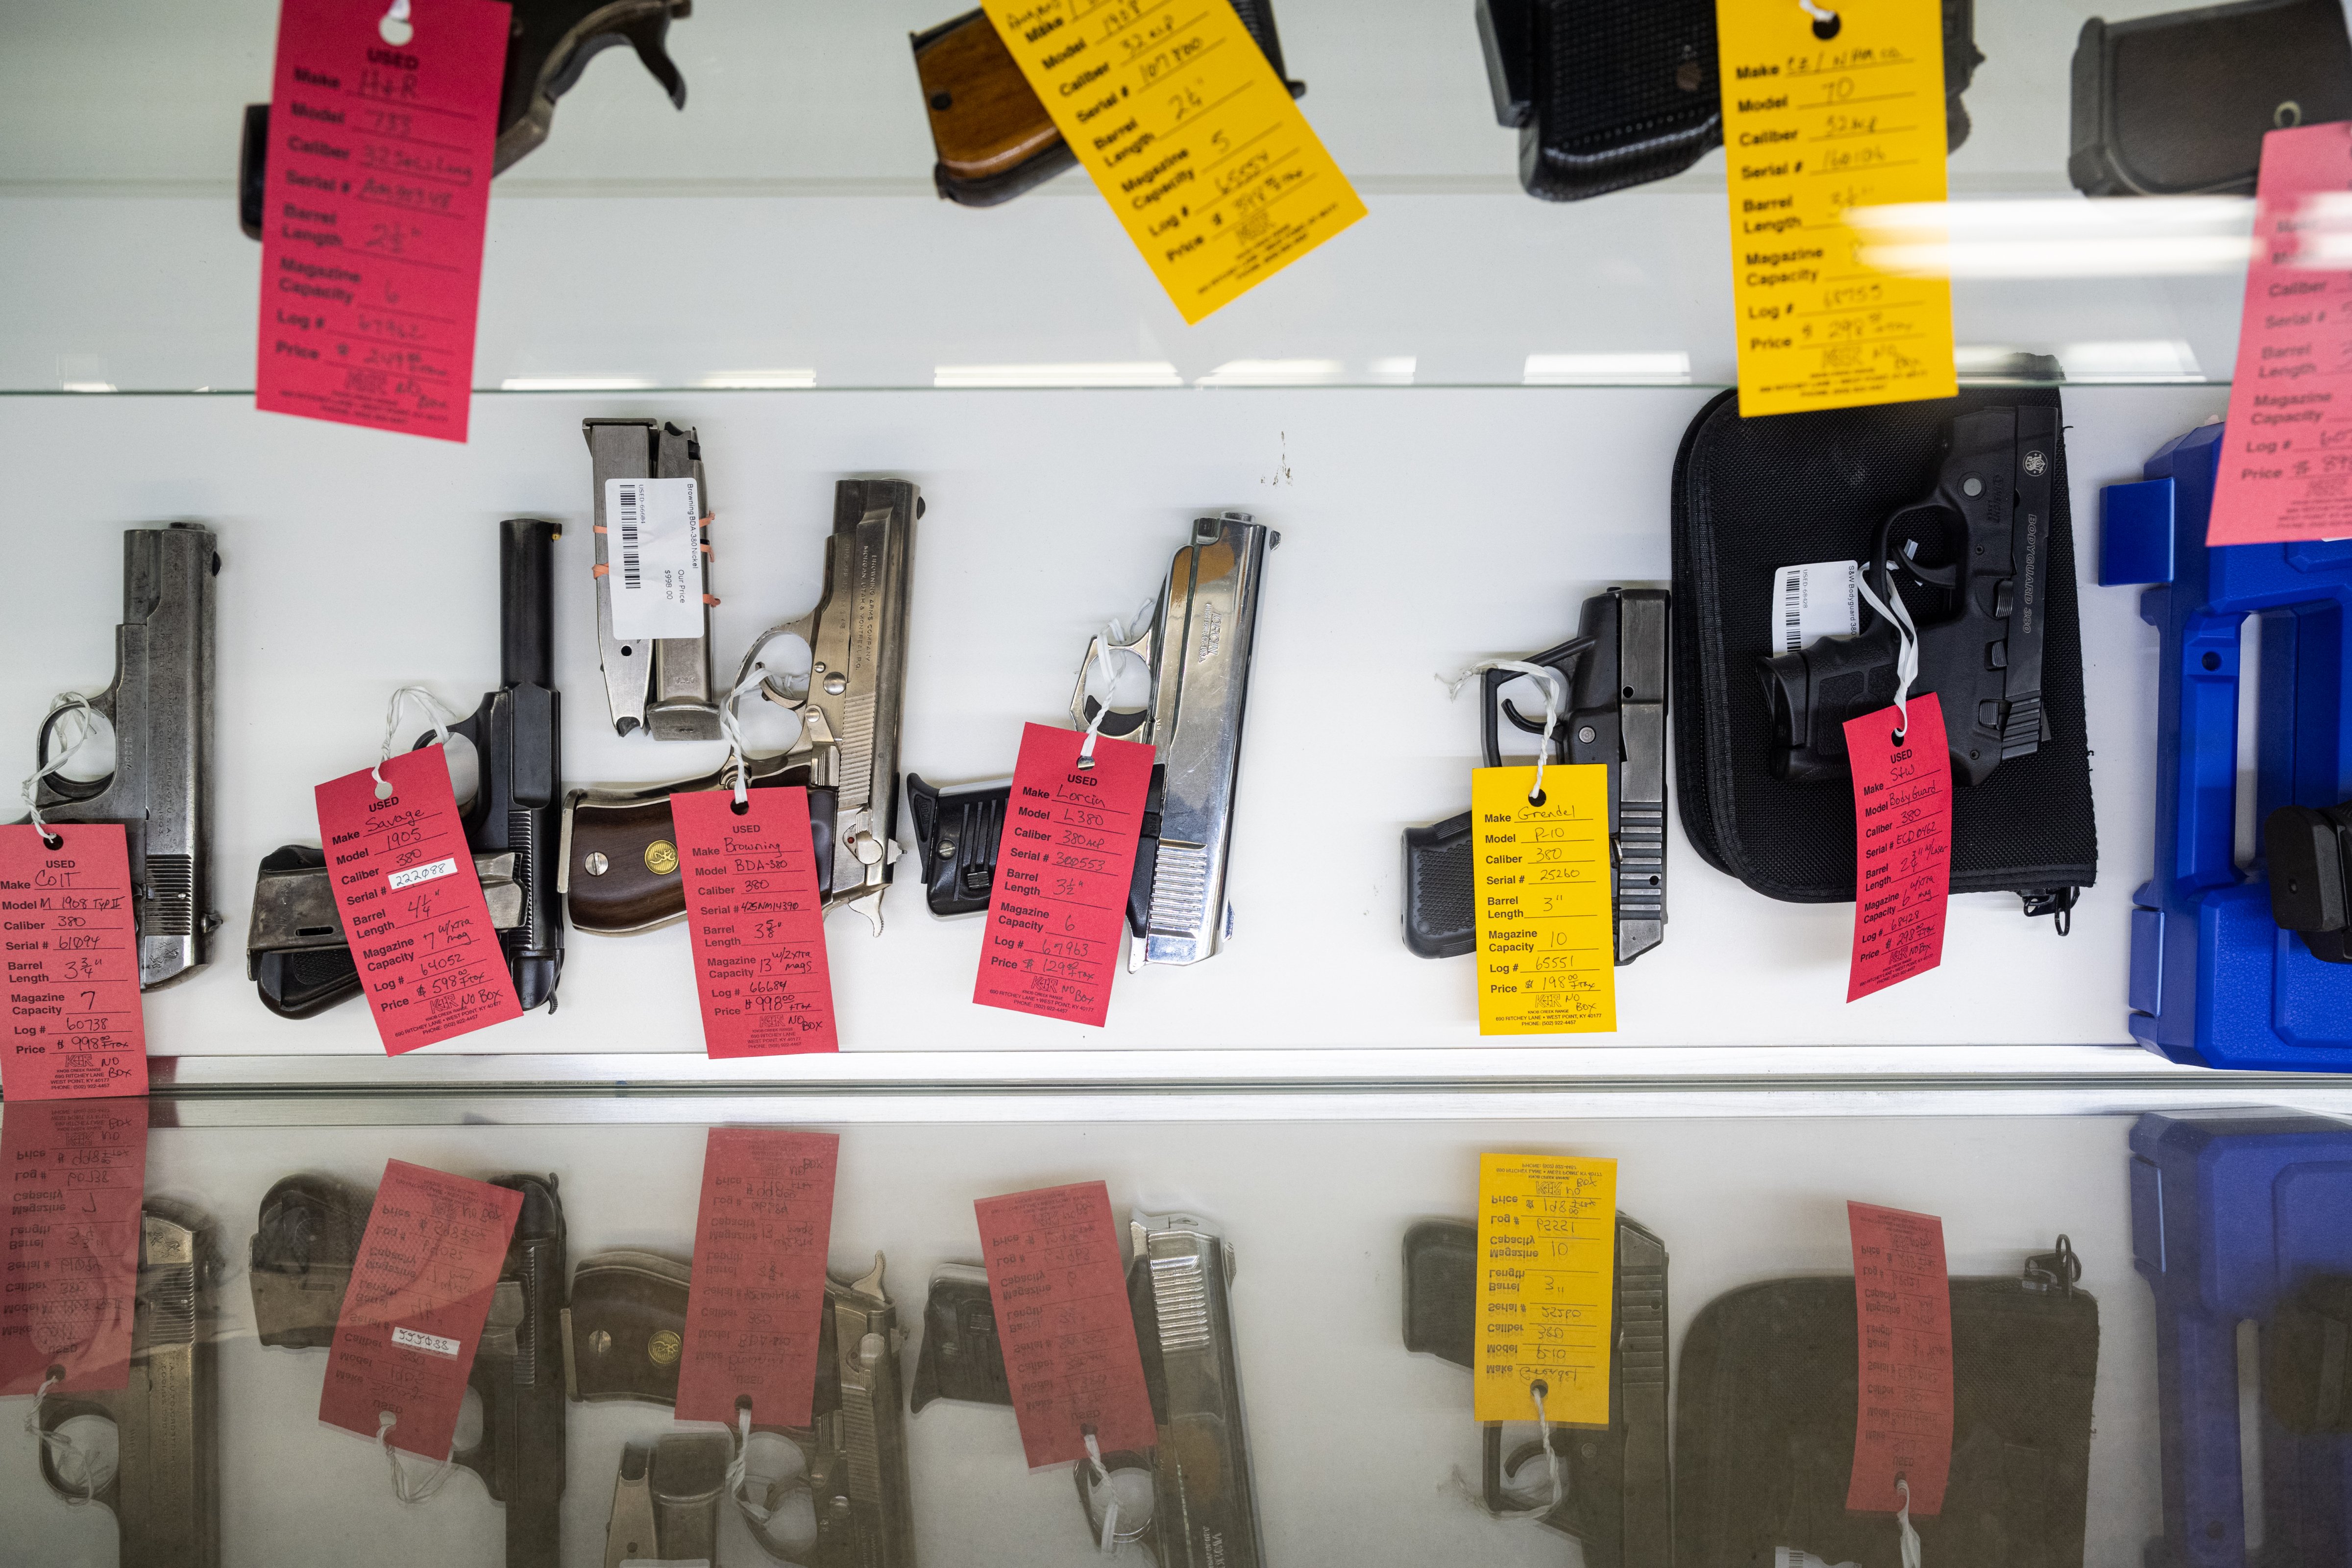 Handguns for sale are displayed at the Knob Creek Gun Range store in West Point, Kentucky, on July 22, 2021. The Supreme Court will hear arguments on a case that could make it easier for Americans to carry concealed handguns. (Jon Cherry—Bloomberg/Getty Images)